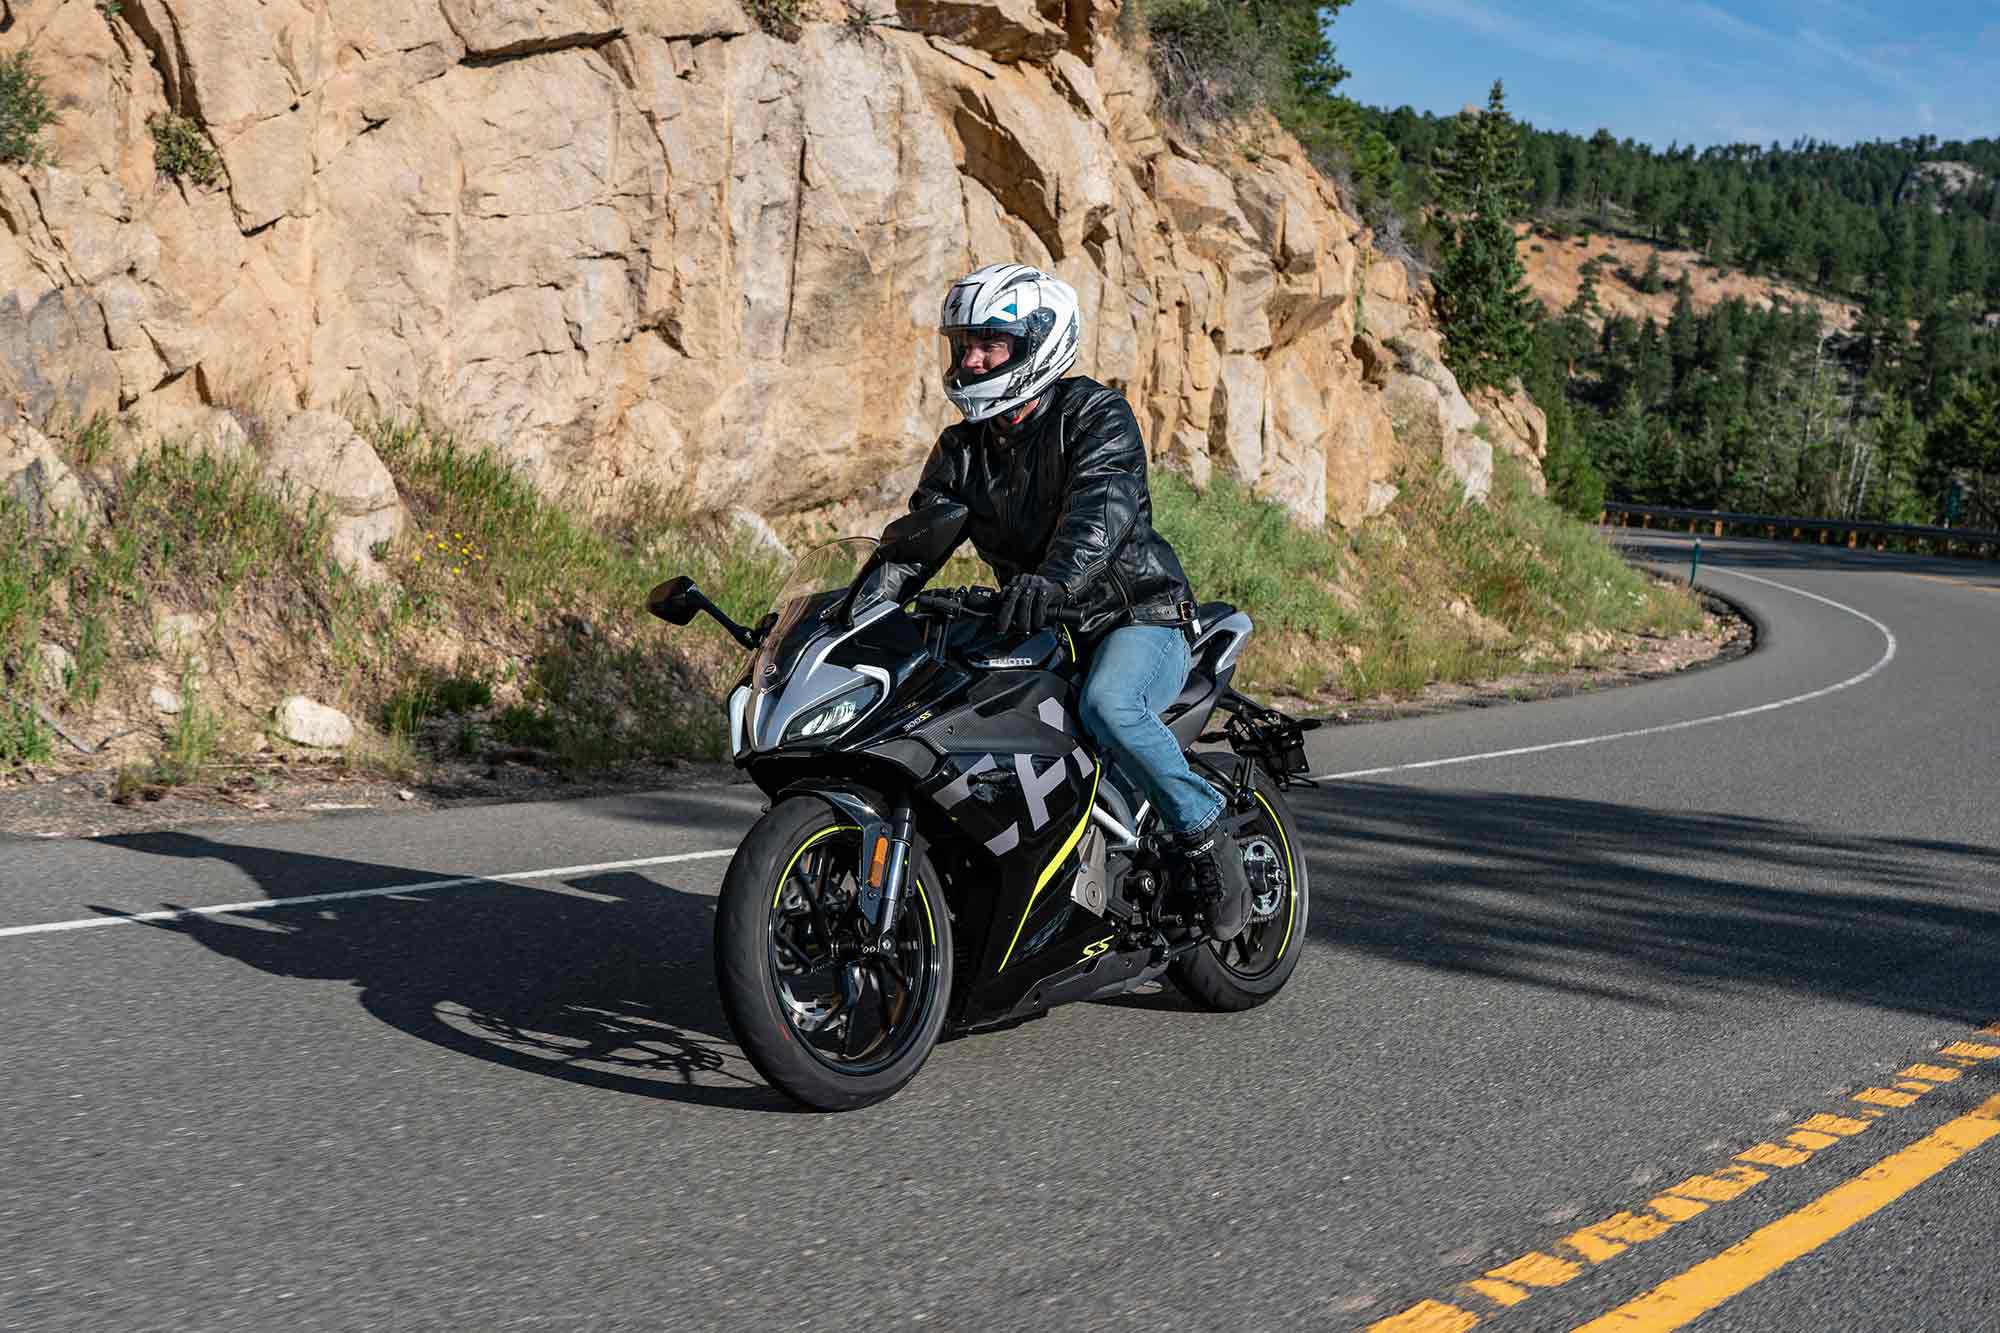 There might be more performance-oriented models in the small-displacement sportbike category, but that doesn’t mean the 300SS isn’t capable of fun days in the canyons.